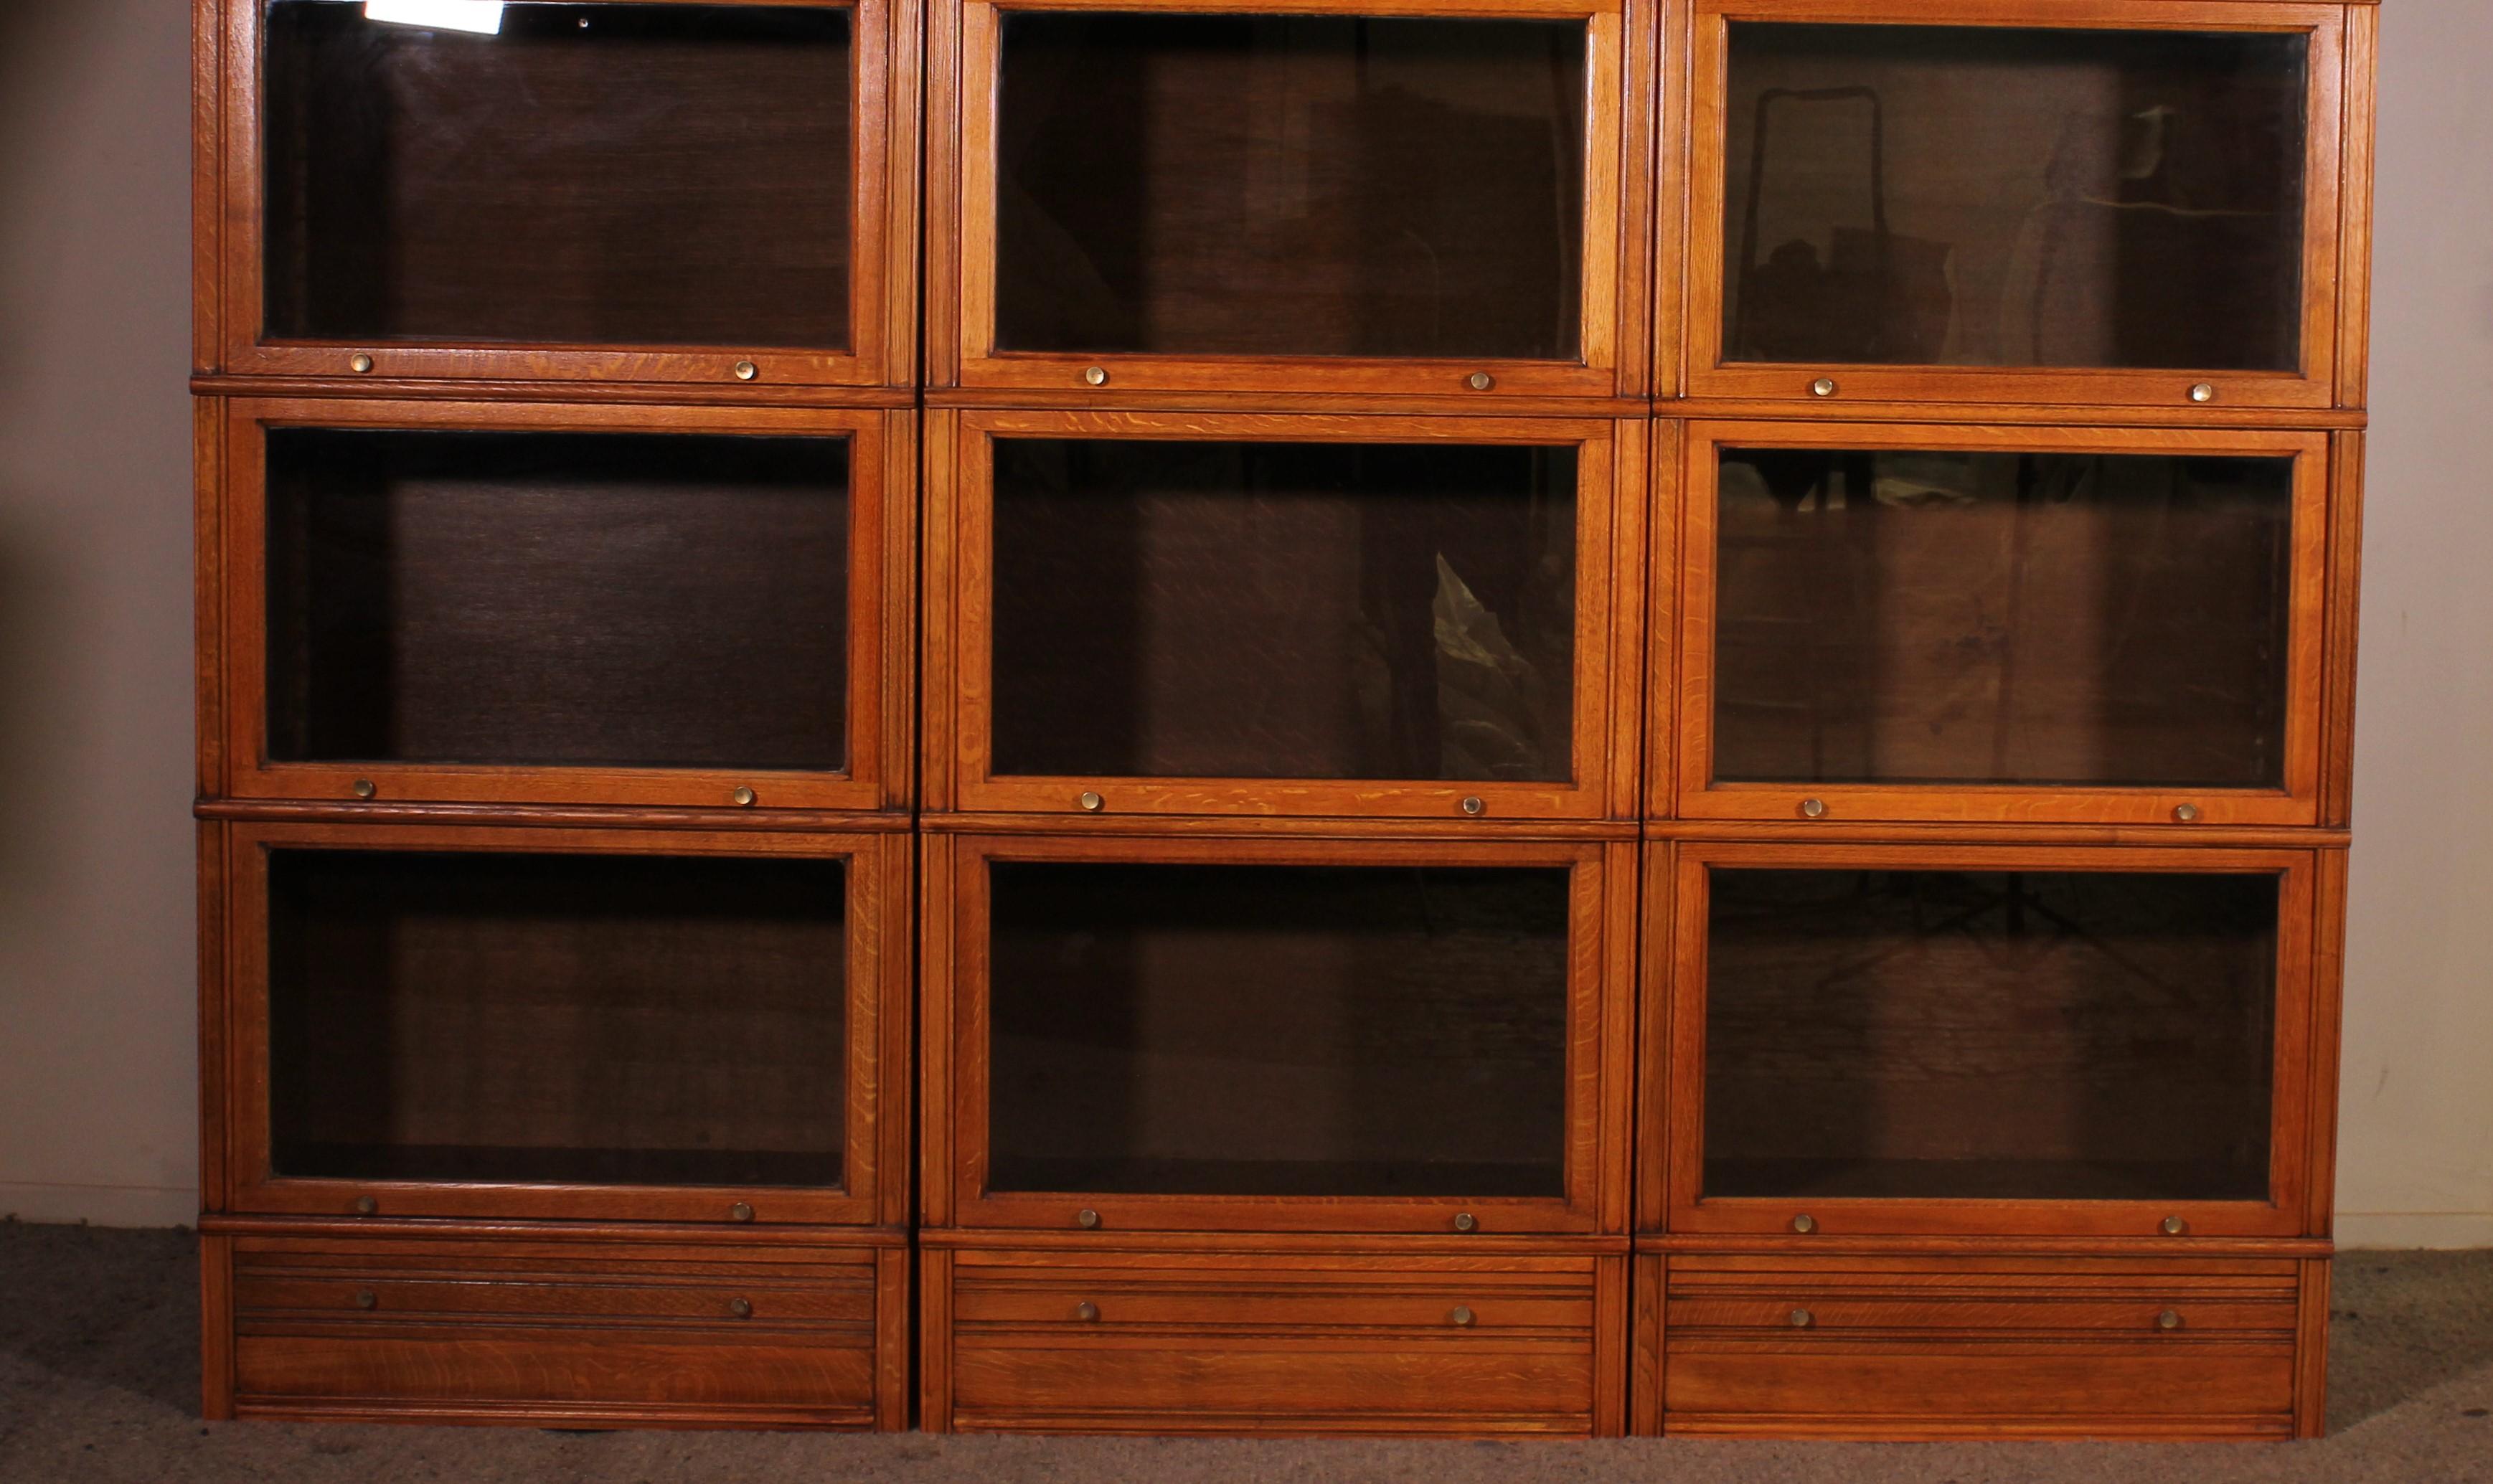 Elegant set of 3 large MD bookcases in light oak from the 60s.

Very beautiful set composed of 4 glazed elements and a drawer in the base.

The library has large elements which allows you to put A4 binders, clothes or large books and objects.

The